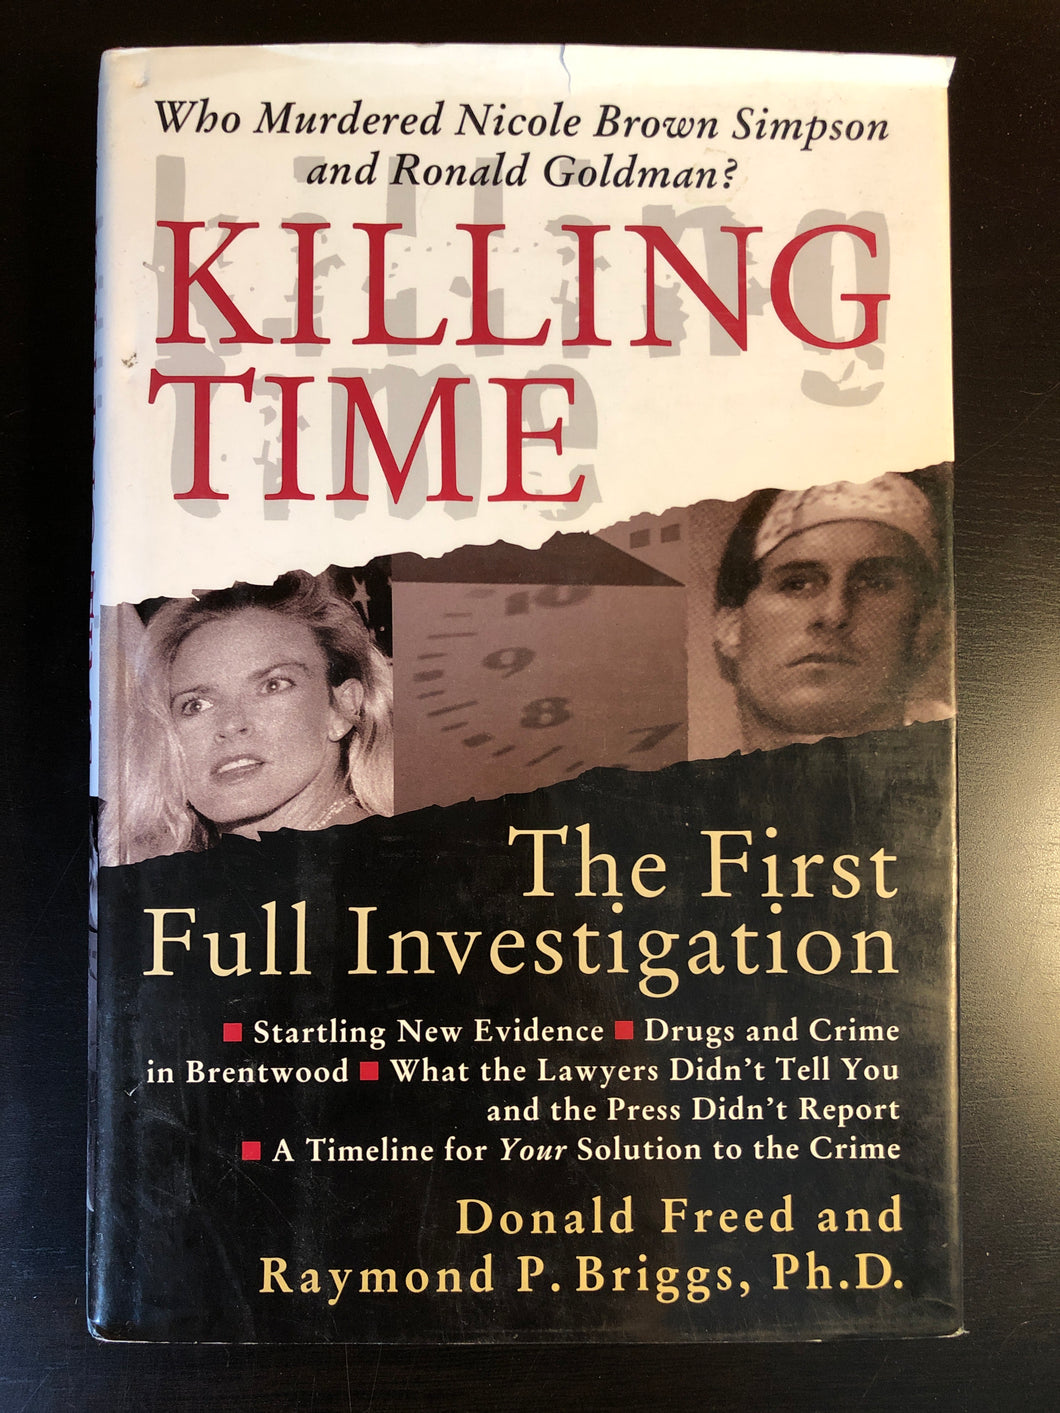 Killing Time: Who Murdered Nicole Brown Simpson and Ronald Goldman?